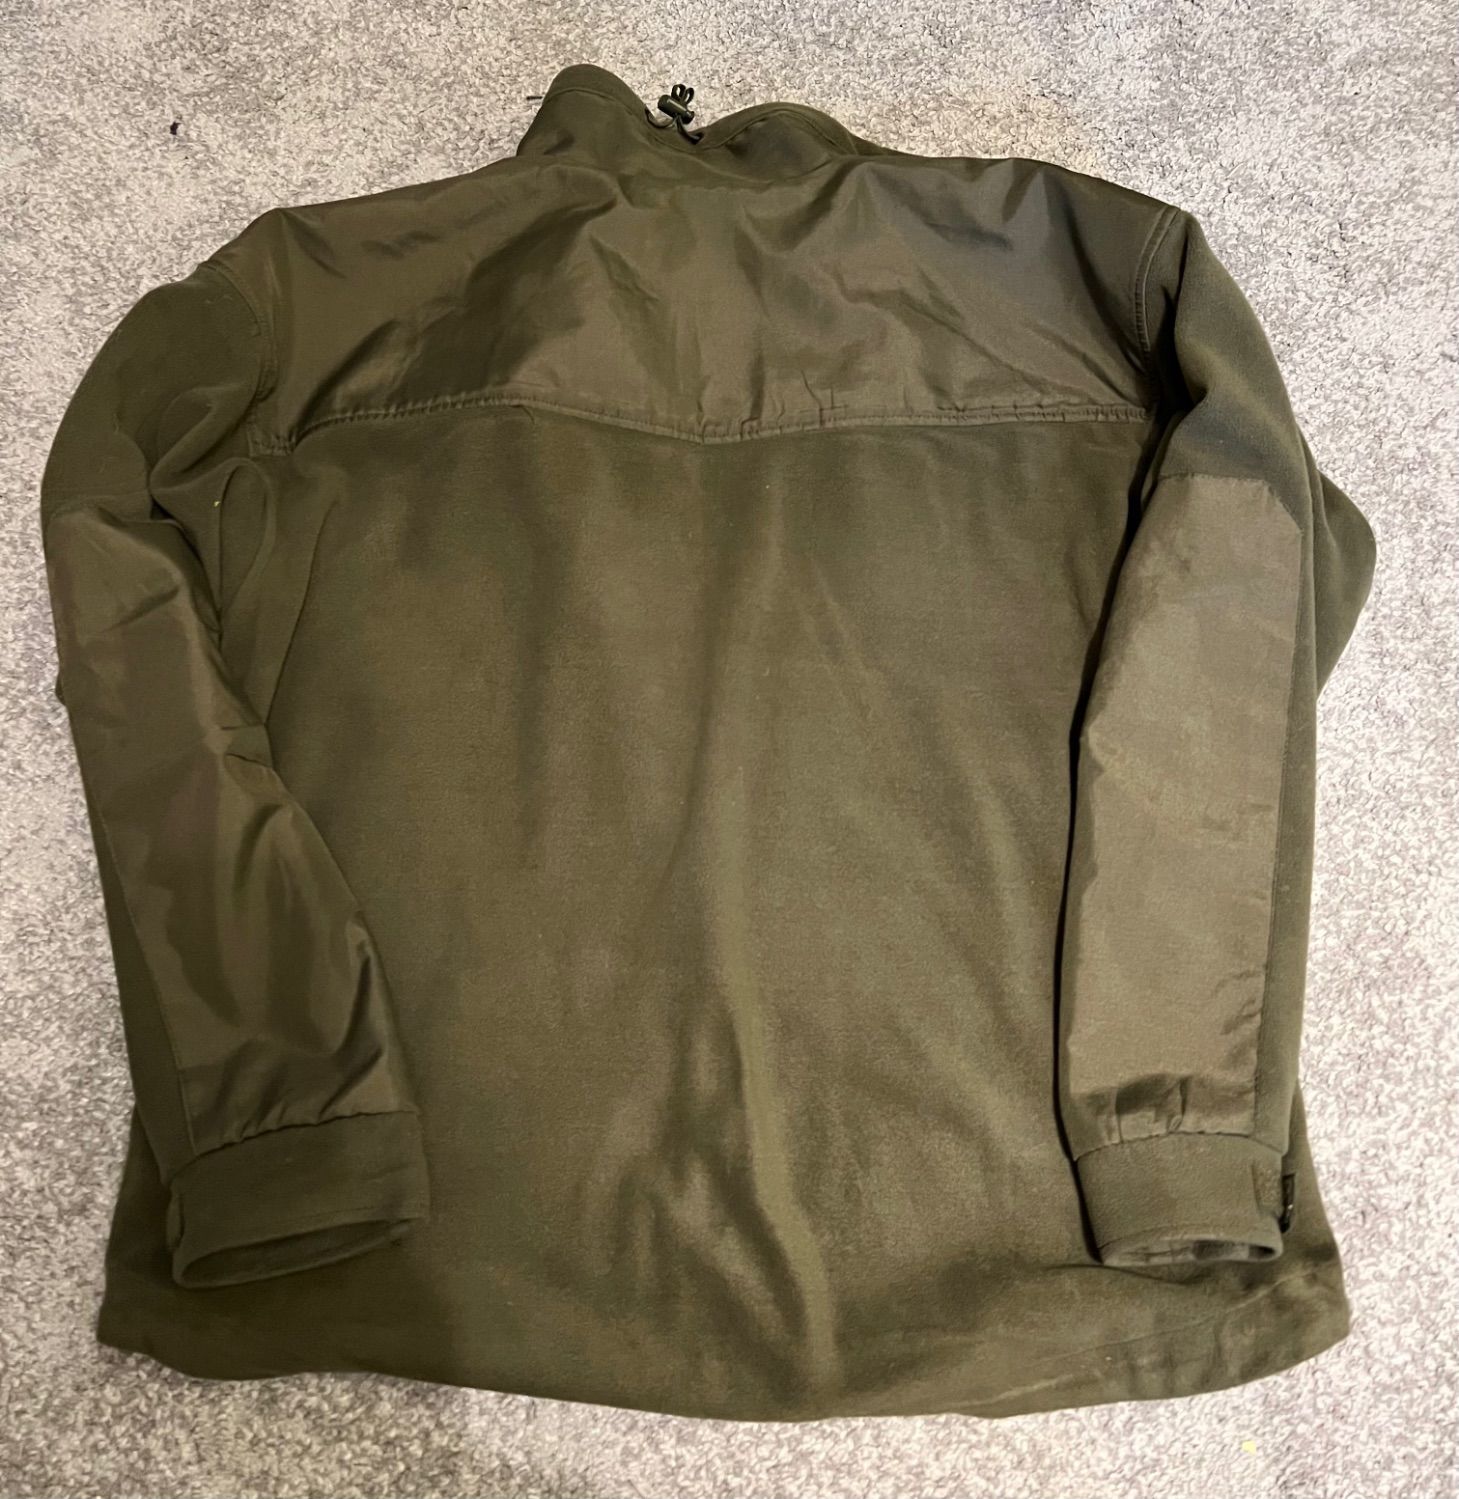 Helikon Classic army fleece - Gear - Airsoft Forums UK